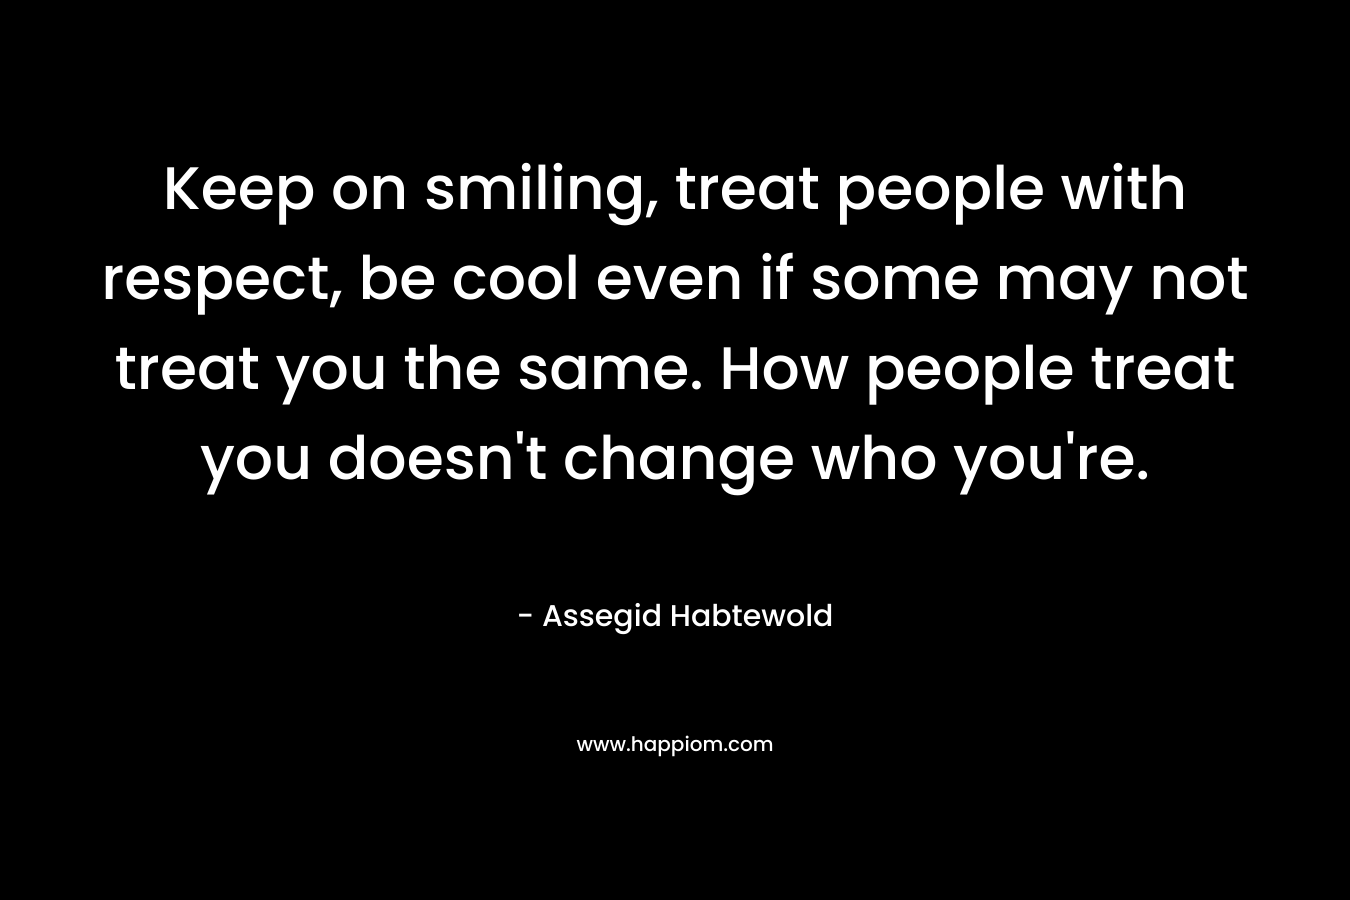 Keep on smiling, treat people with respect, be cool even if some may not treat you the same. How people treat you doesn't change who you're.